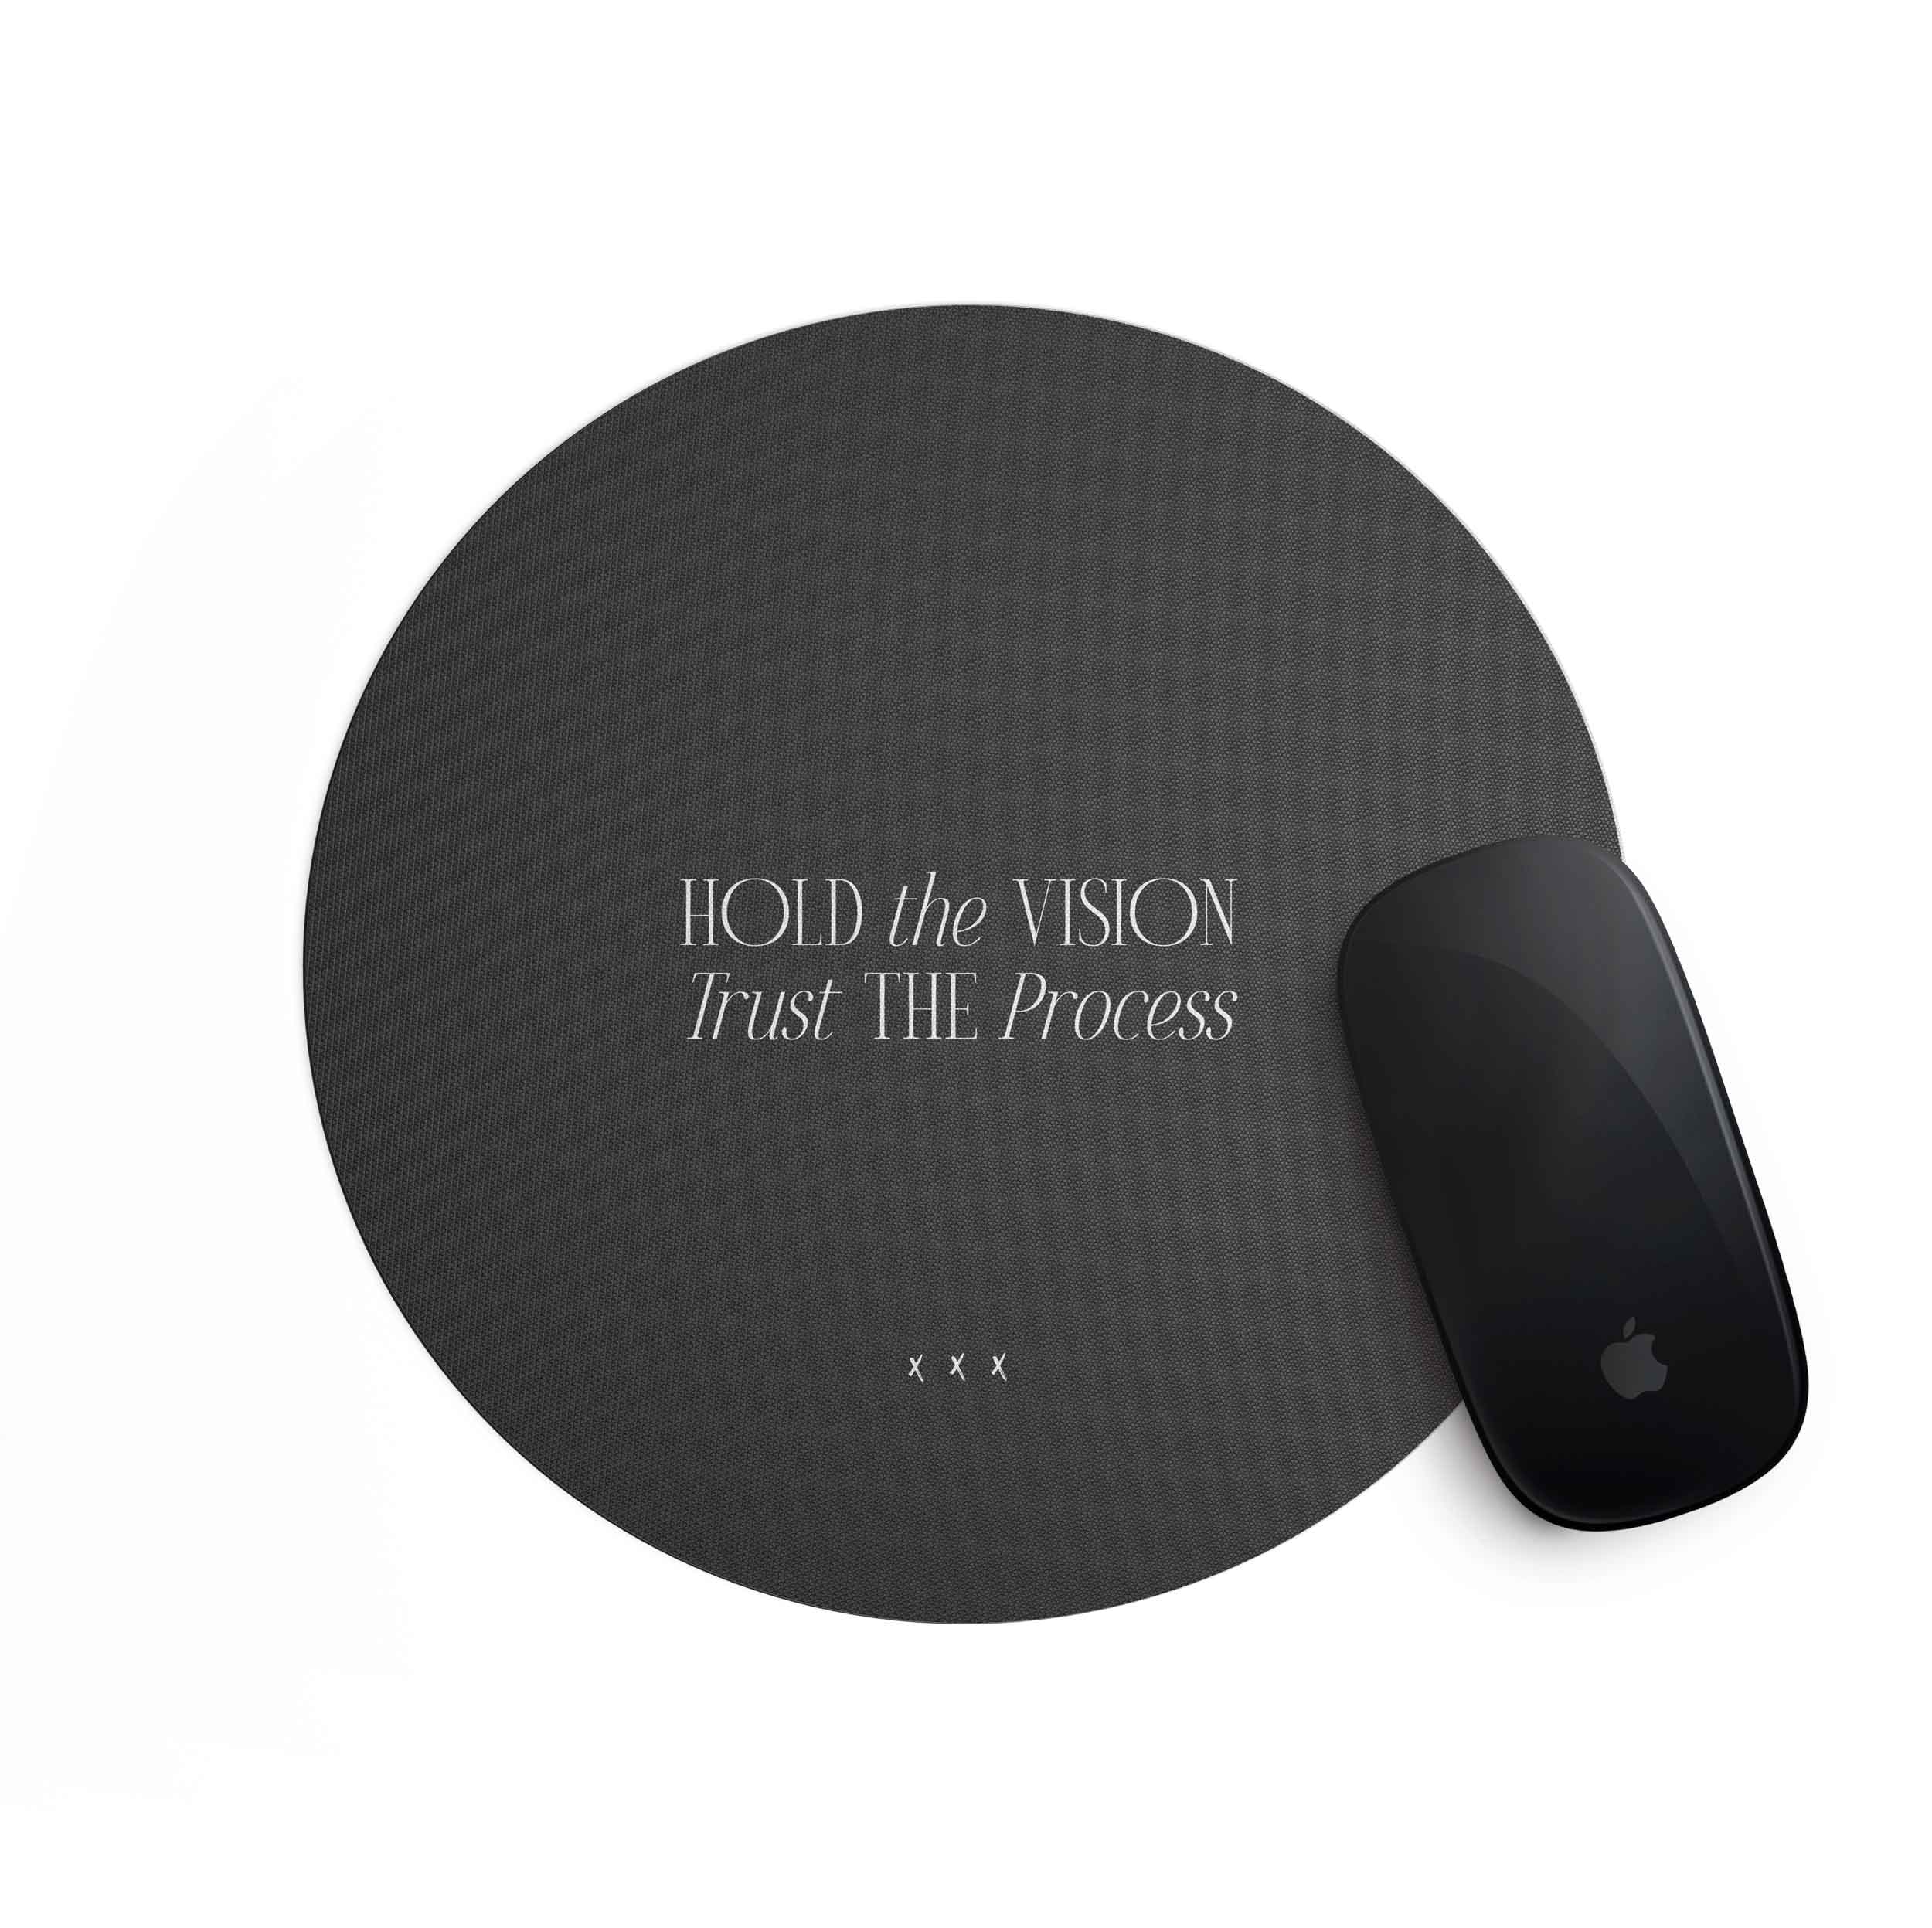 Mousepad, "Hold the Vision", schwarz